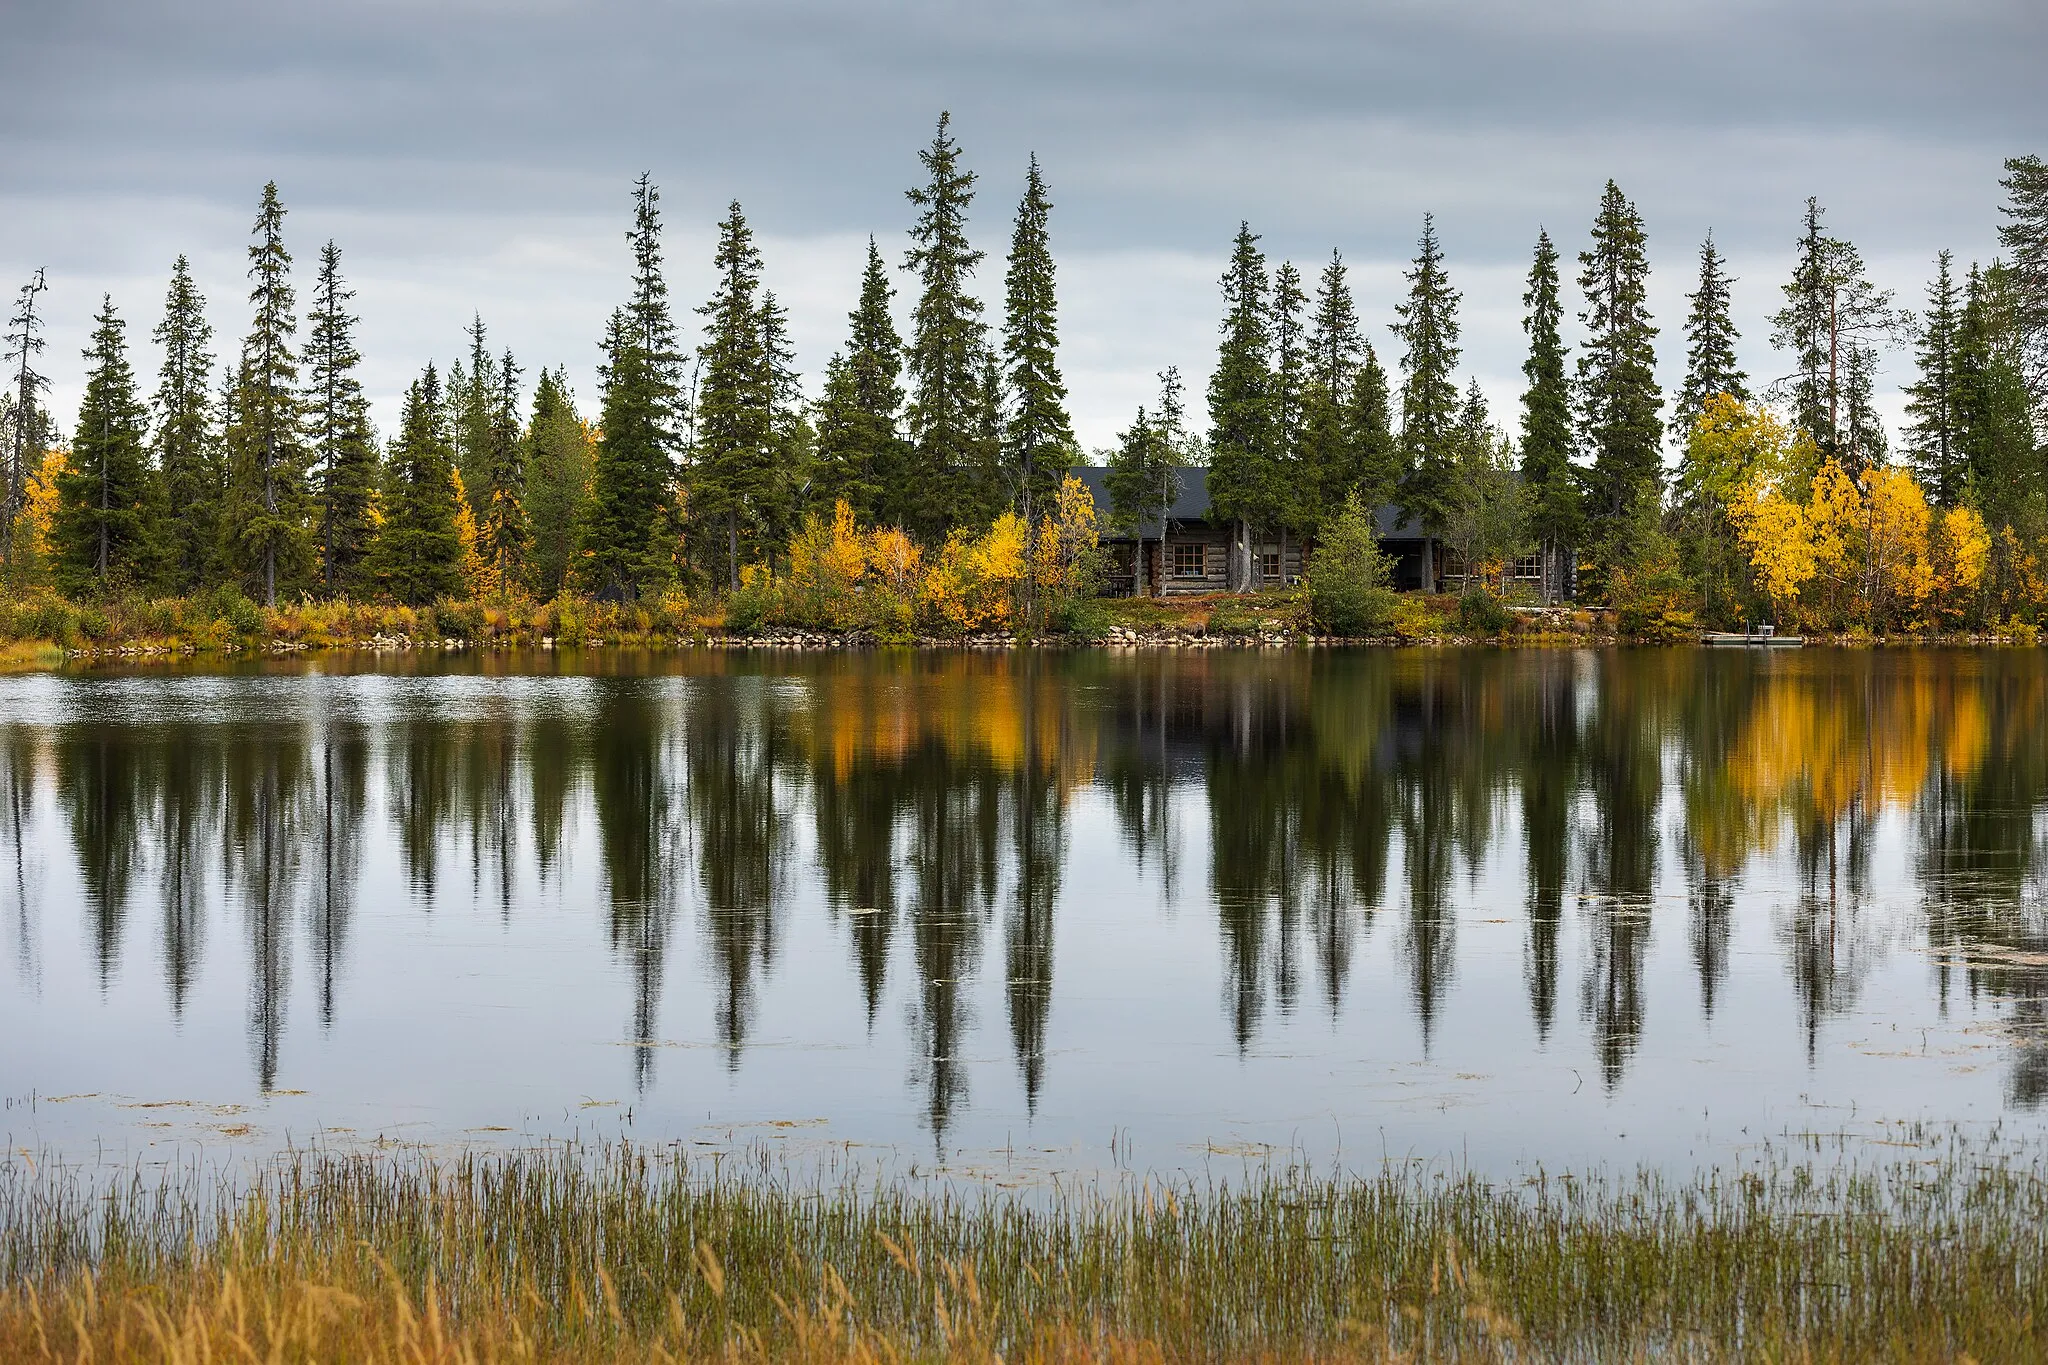 Photo showing: Outalampi lake at Luosto in Sodankylä municipality, Lapland, Finland in 2021 September.